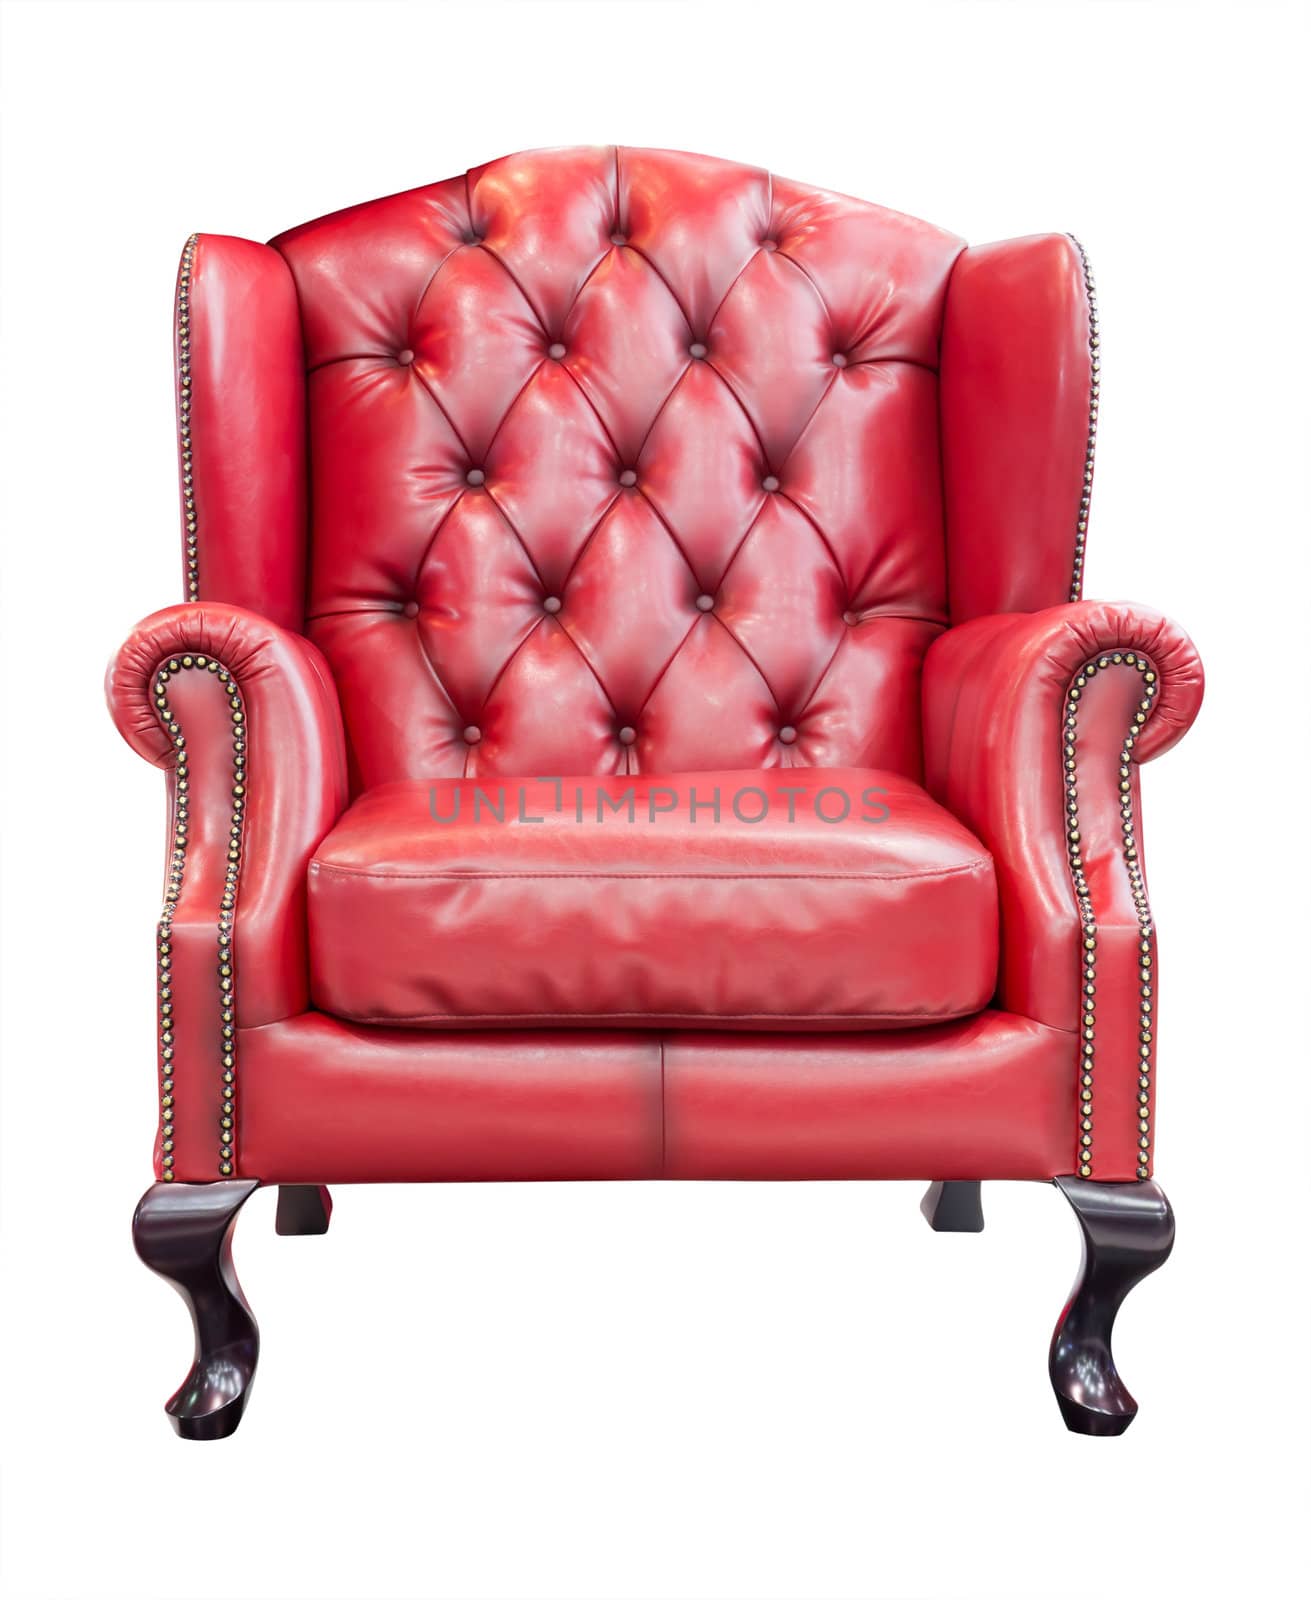 red luxury armchair isolated with clipping path by tungphoto